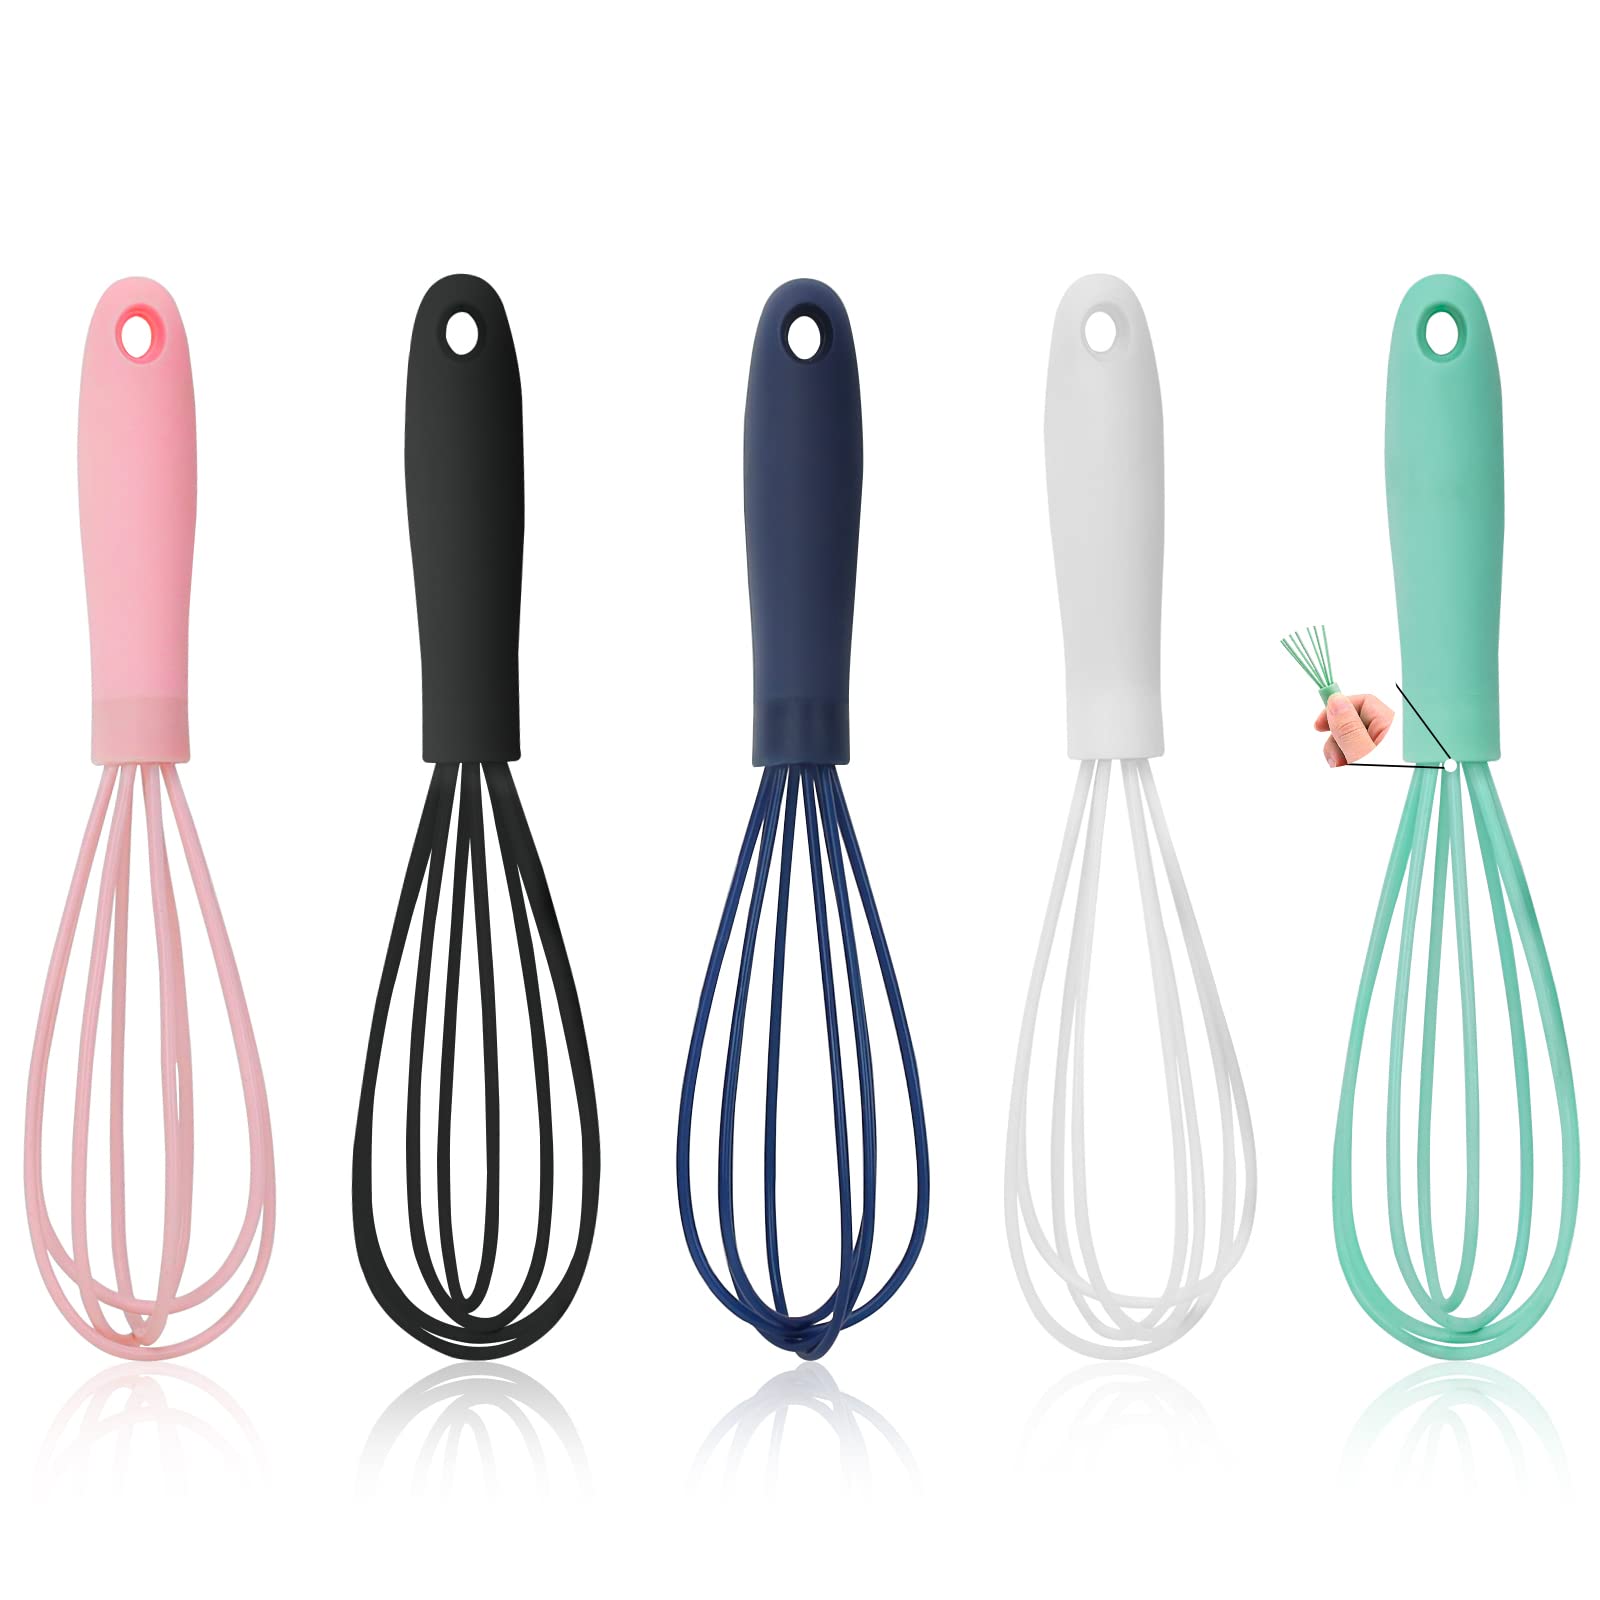 NCAM 5 Pcs Silicone Whisk for cooking - Mini Whisk Stainless Steel Dough Whisk, Non Stick Hand Tiny Balloon Wire Whisk, Milk egg Frot